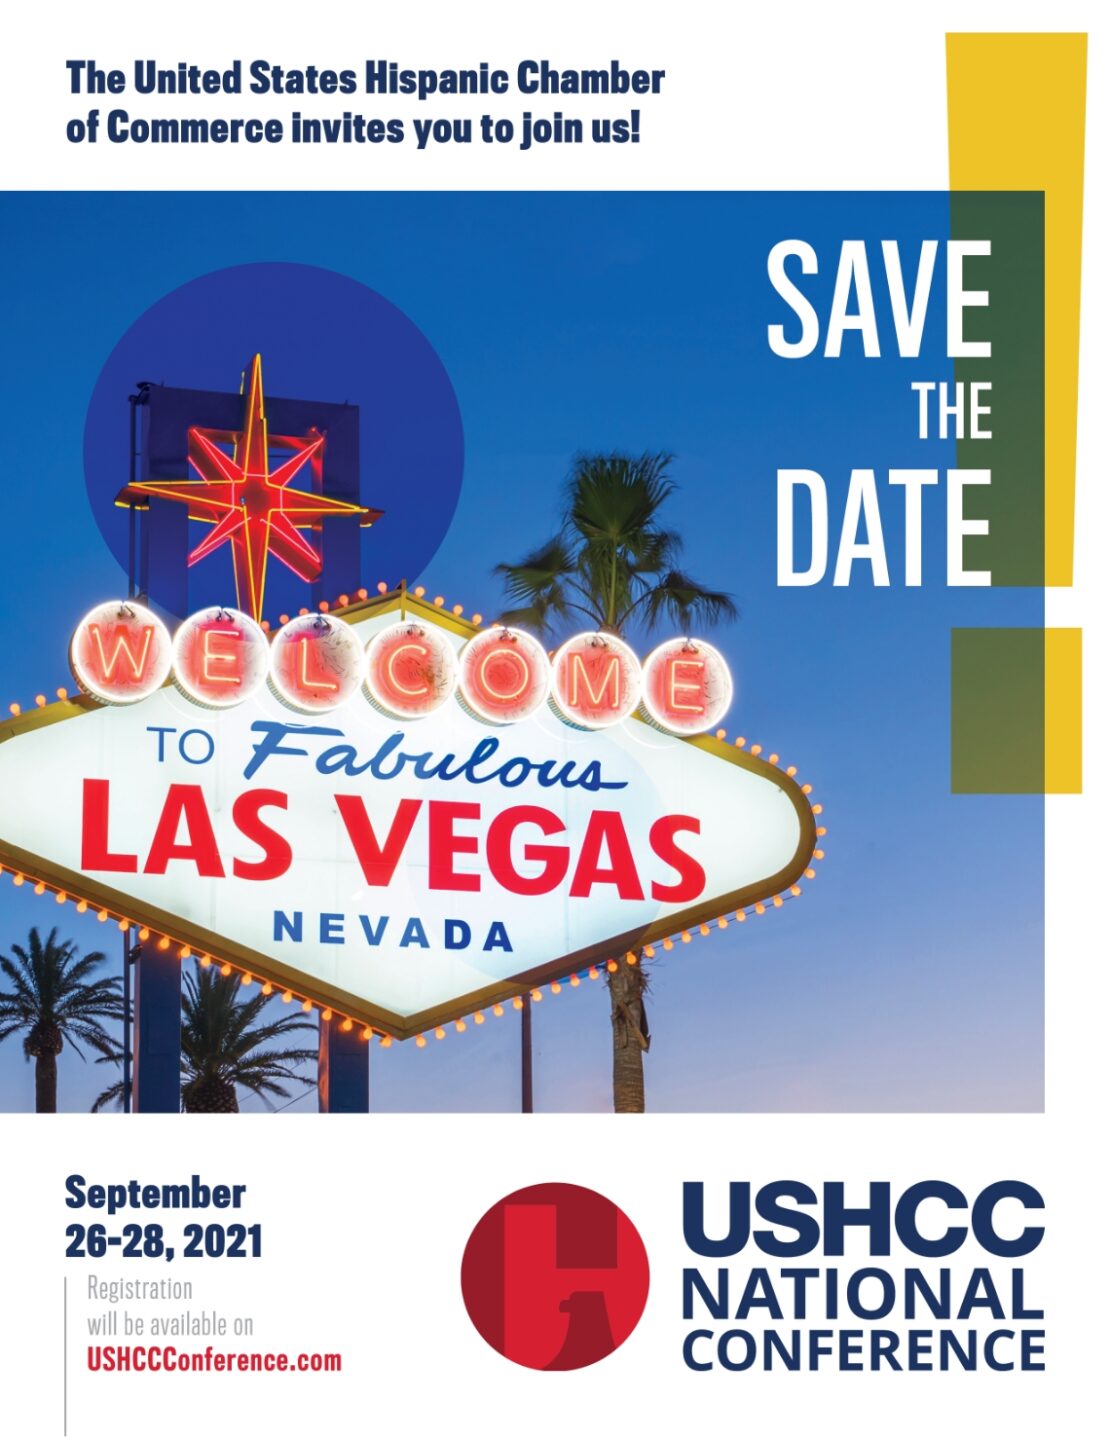 USHCC National Conference Carrasquillo Law Group PC .. Corporate